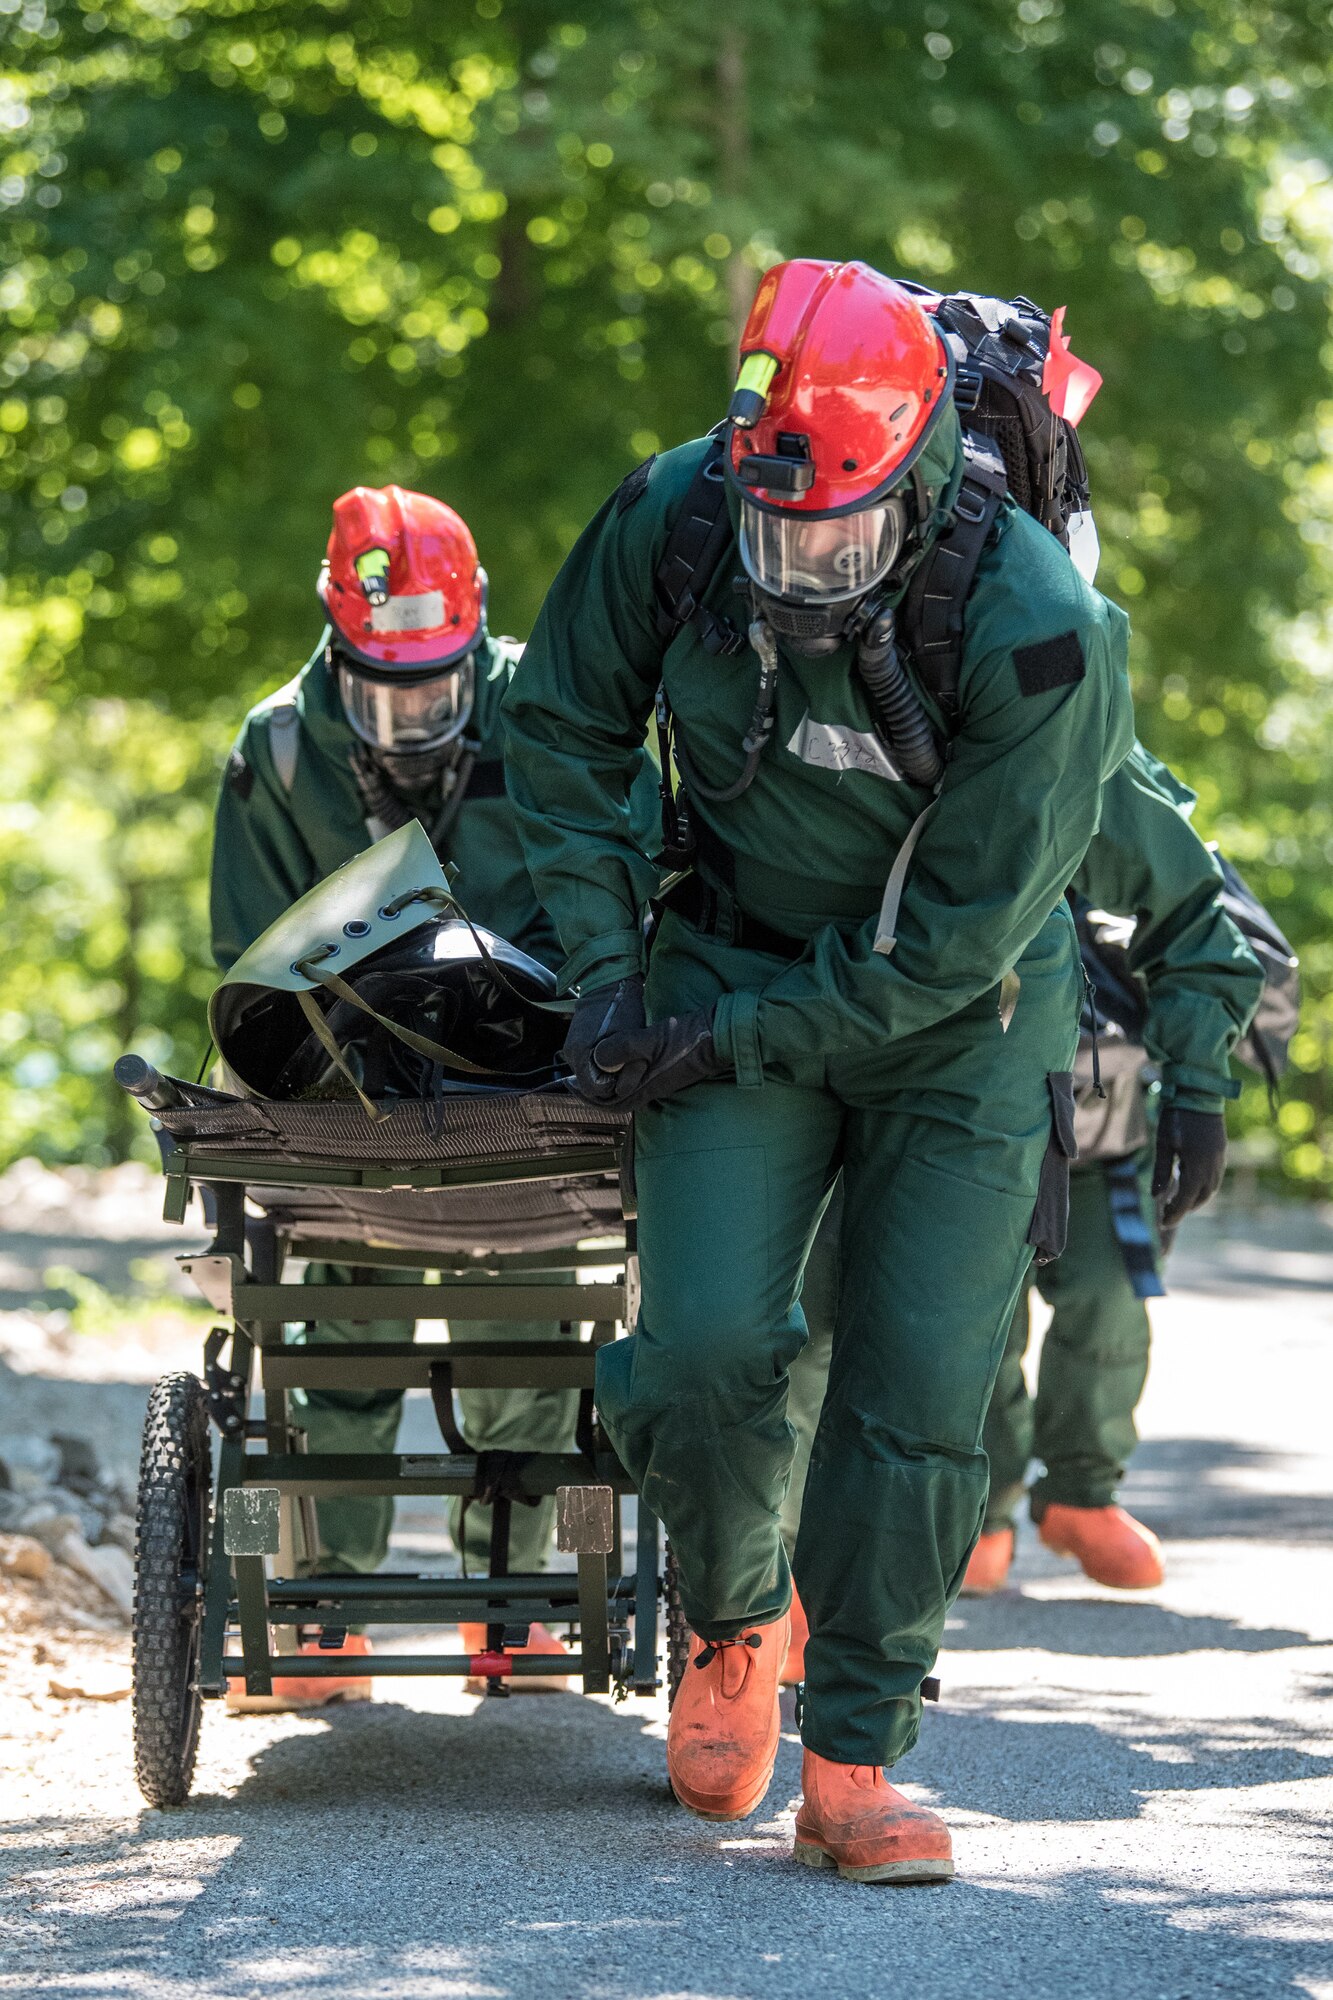 Airmen from the Kentucky Air National Guard’s Fatality Search and Recovery Team move a training mannequin with a gurney during a training exercise at Rough River State Resort Park in Falls of Rough, Ky., on July 18, 2018. Thirteen members of the 123rd Airlift Wing participated in the three-day exercise to simulate the recovery and repatriation of fallen service members. (U.S. Air National Guard photo by Master Sgt. Phil Speck)